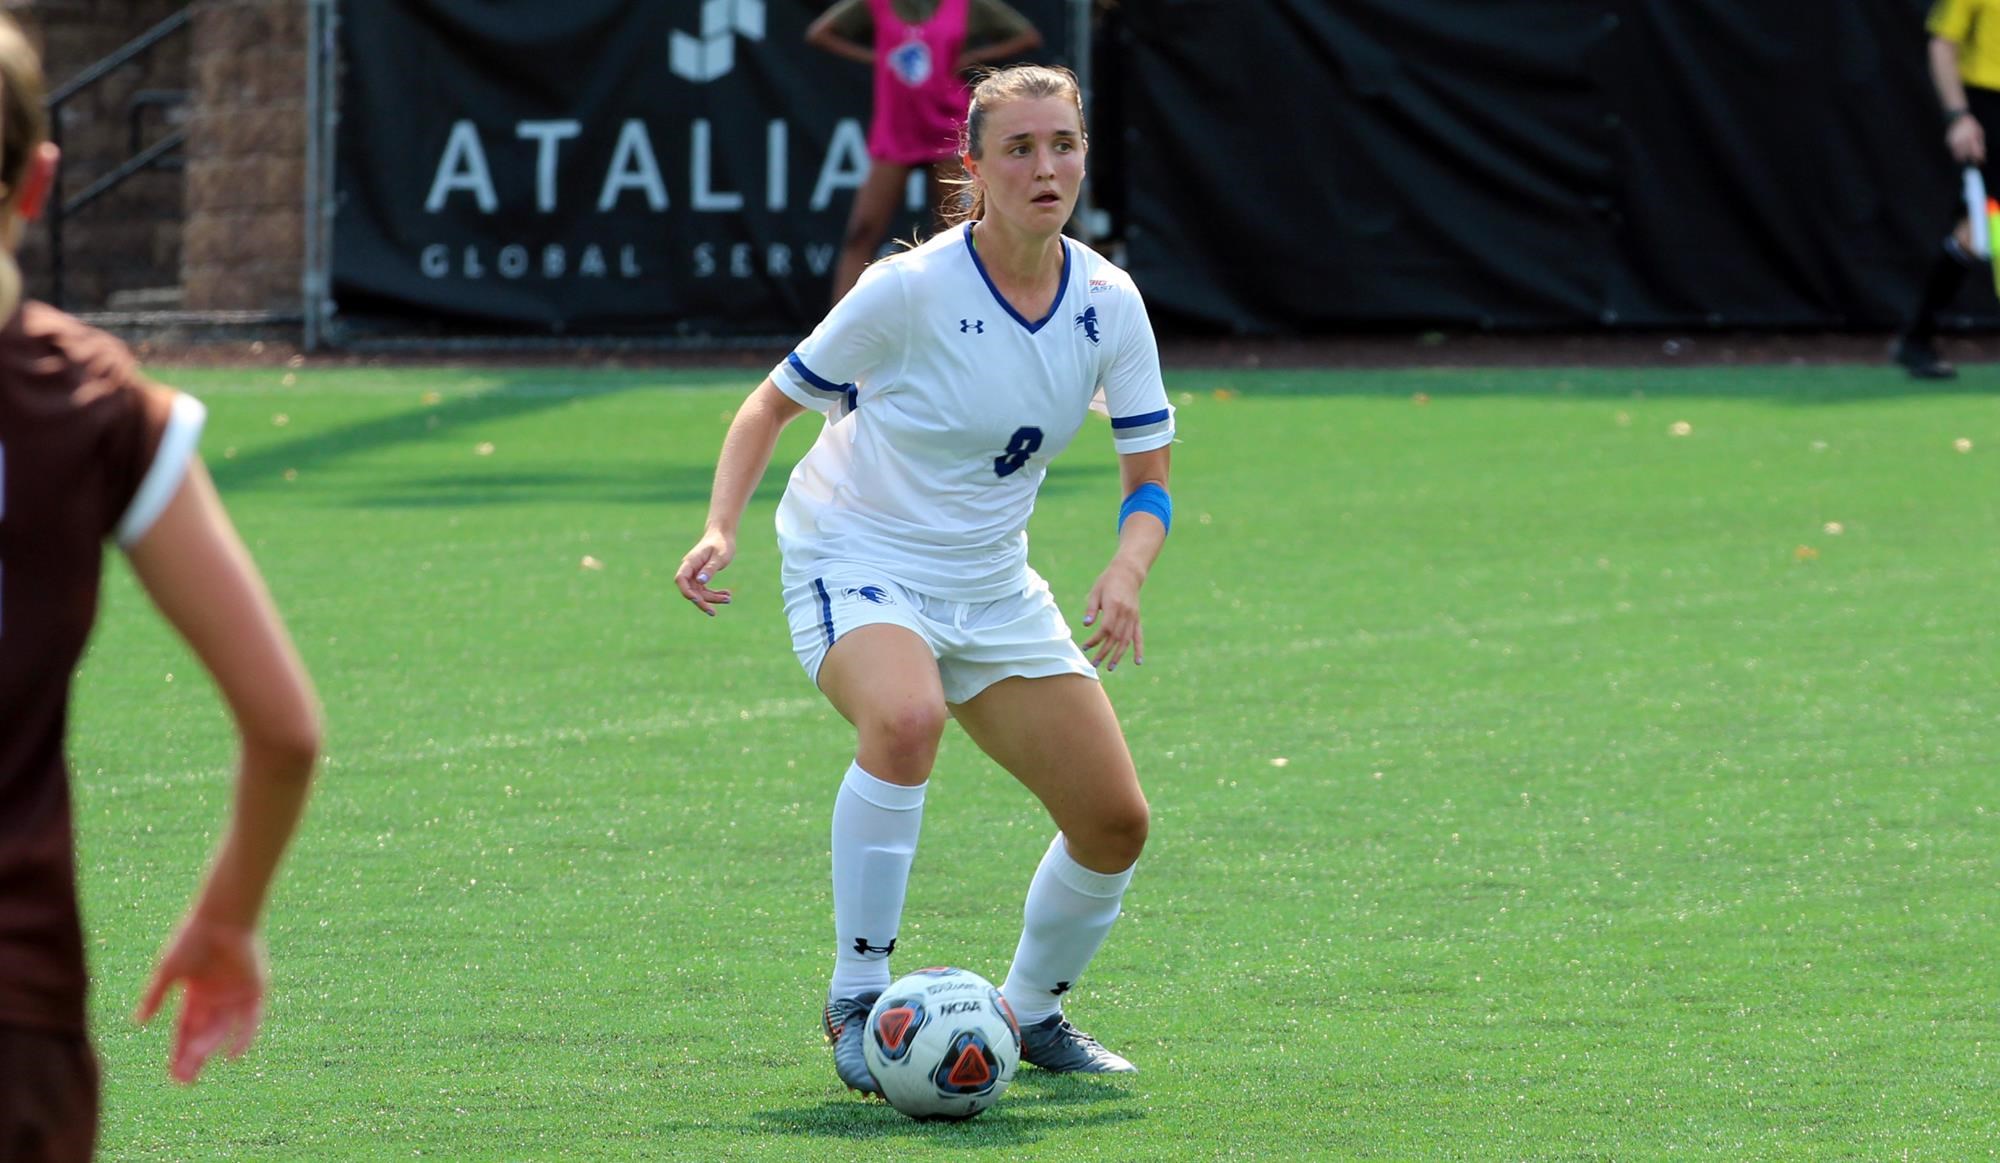 A Seton Hall women's soccer player dribbles the ball on the field during a game.